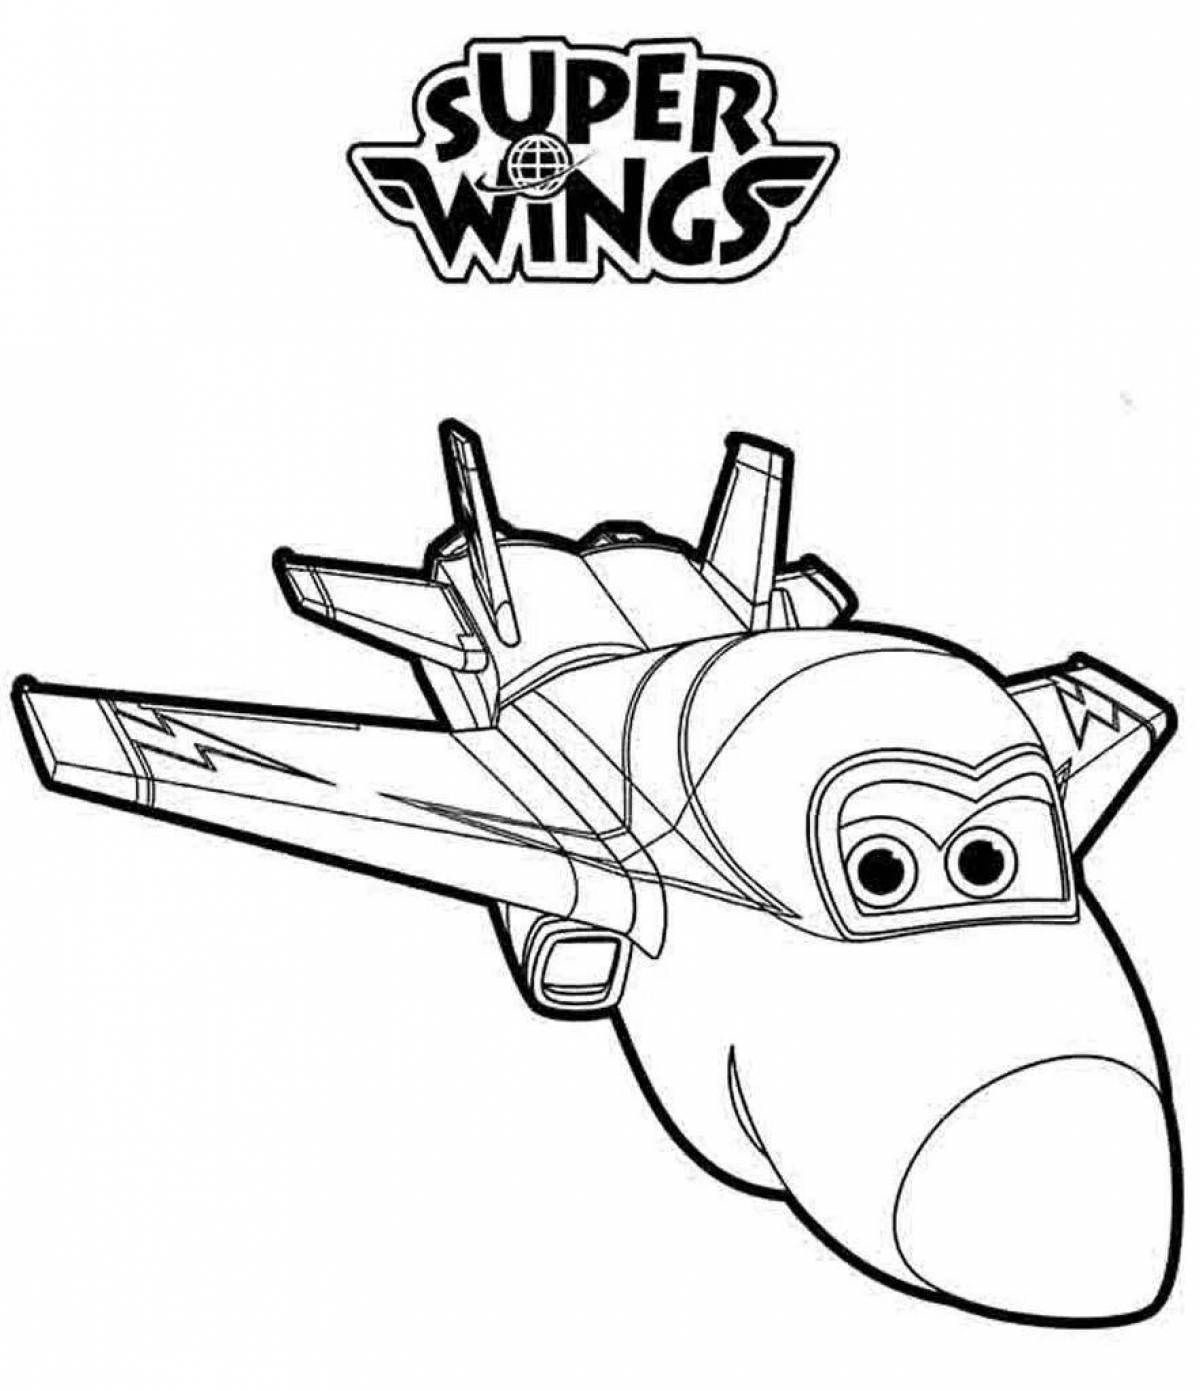 Amazing airplane coloring page